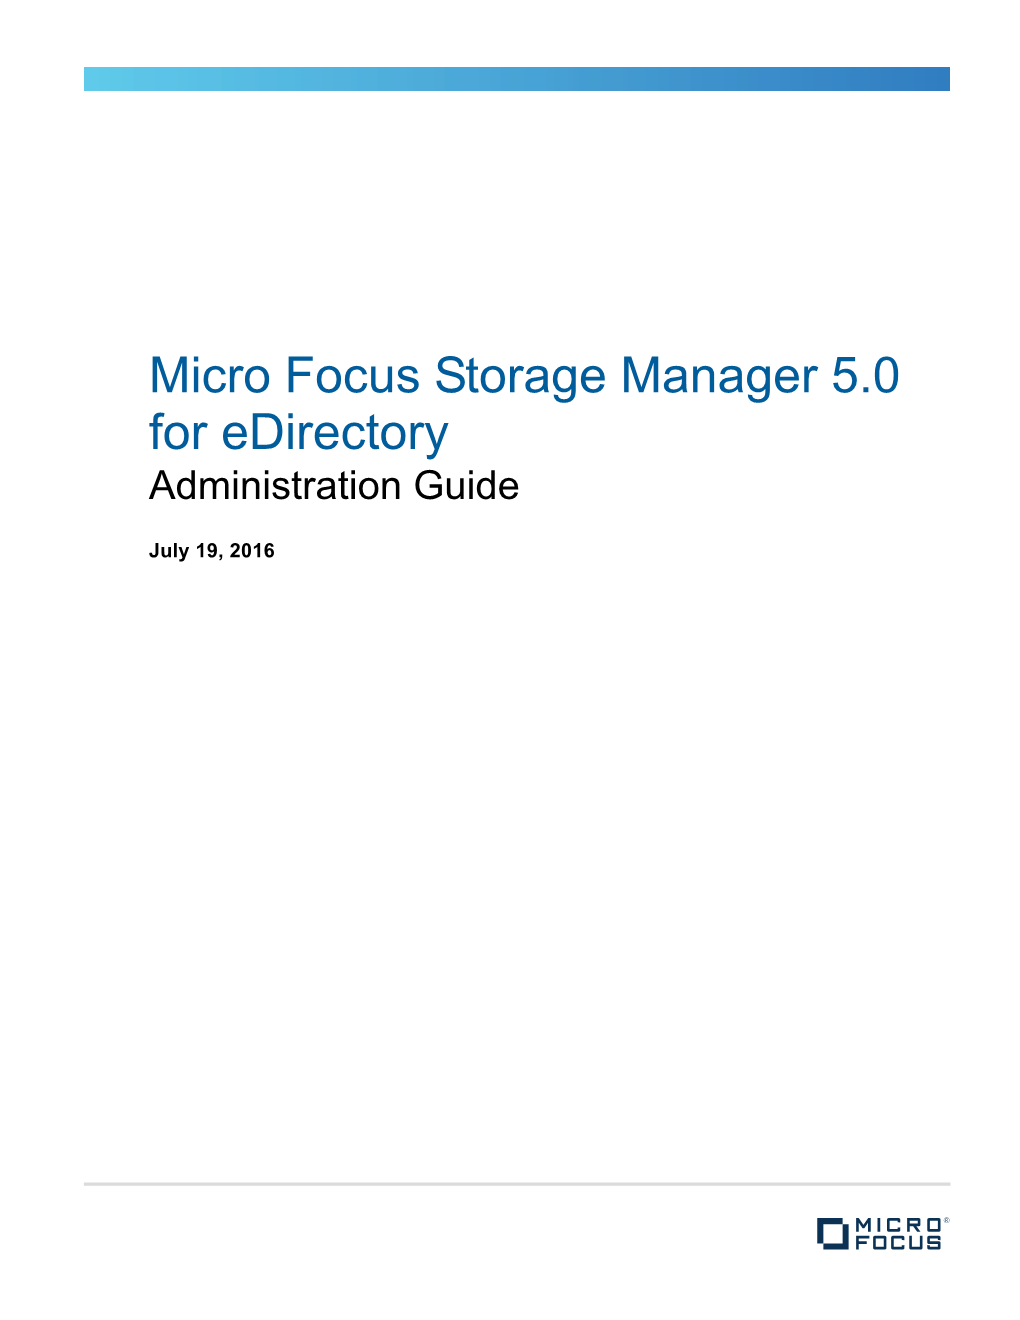 Micro Focus Storage Manager 5.0 for Edirectory Administration Guide